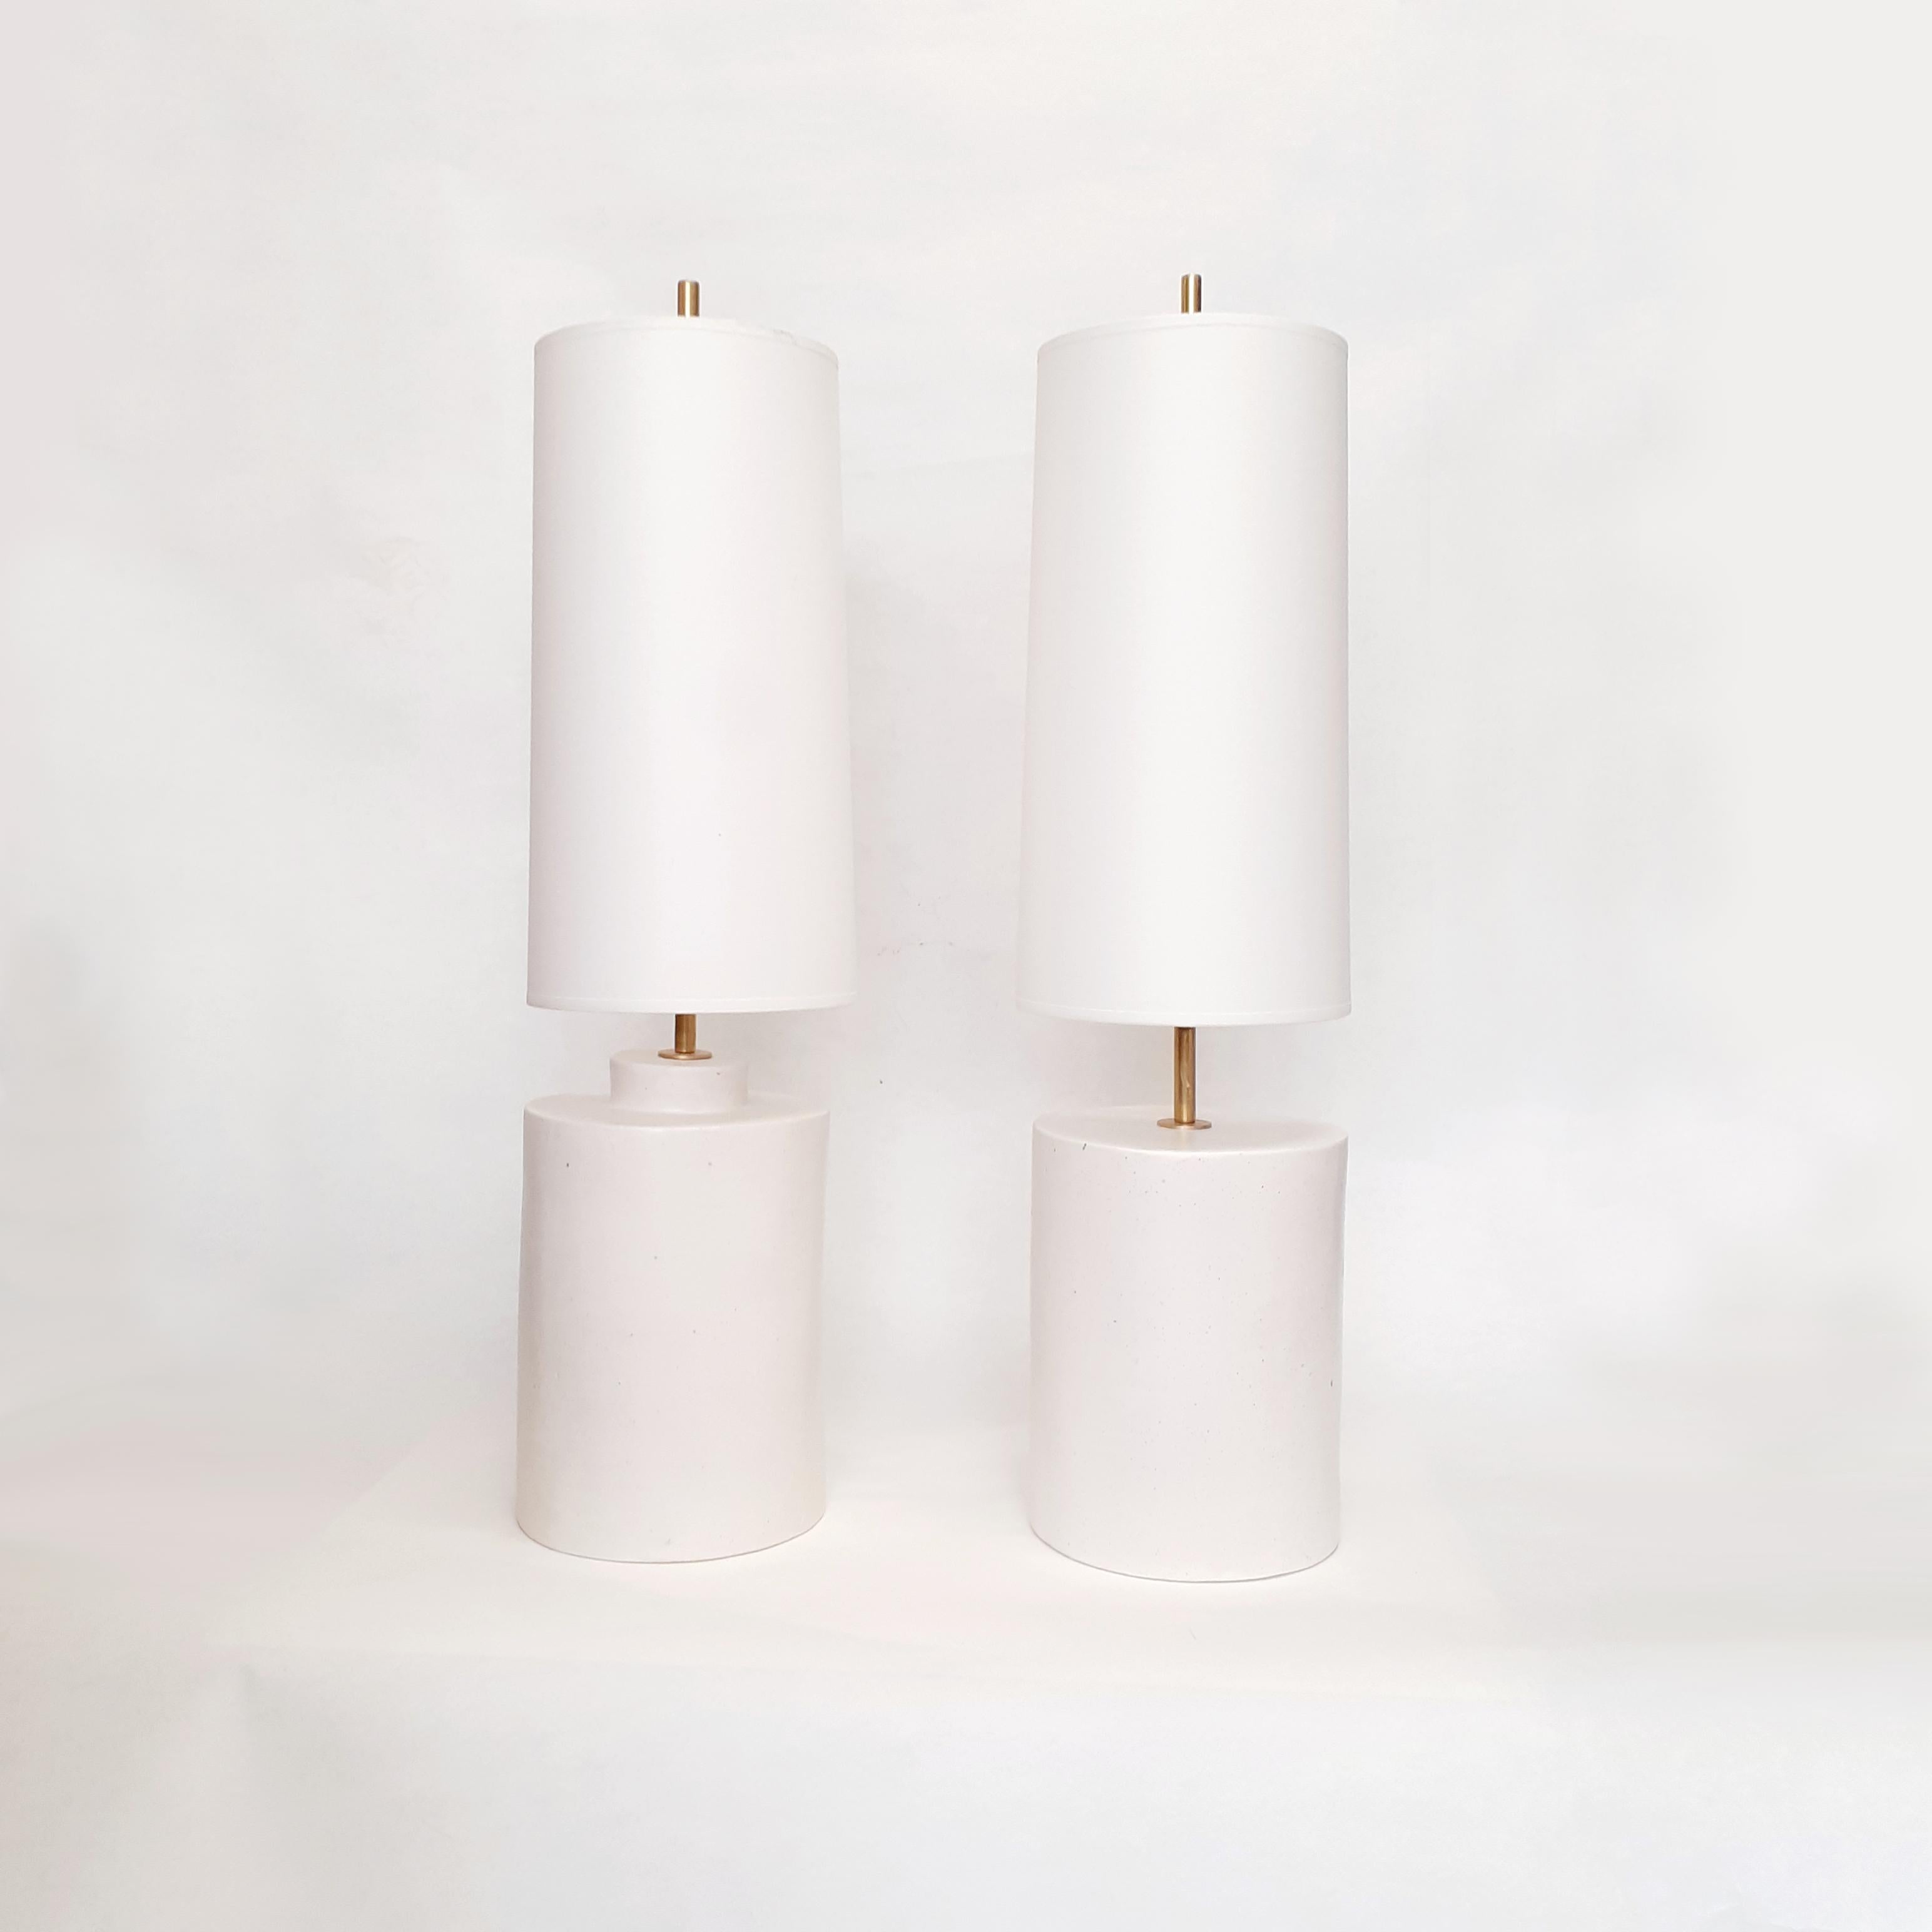 Pair of ceramic lamps with shade, handmade in Parisian workshop by Elsa Foulon Studio.
Chic and minimalist design.
Cotton shade, brass structure, soft white enameled ceramic, screw bulb. 
UL Listed electricity on request.

All of our items are